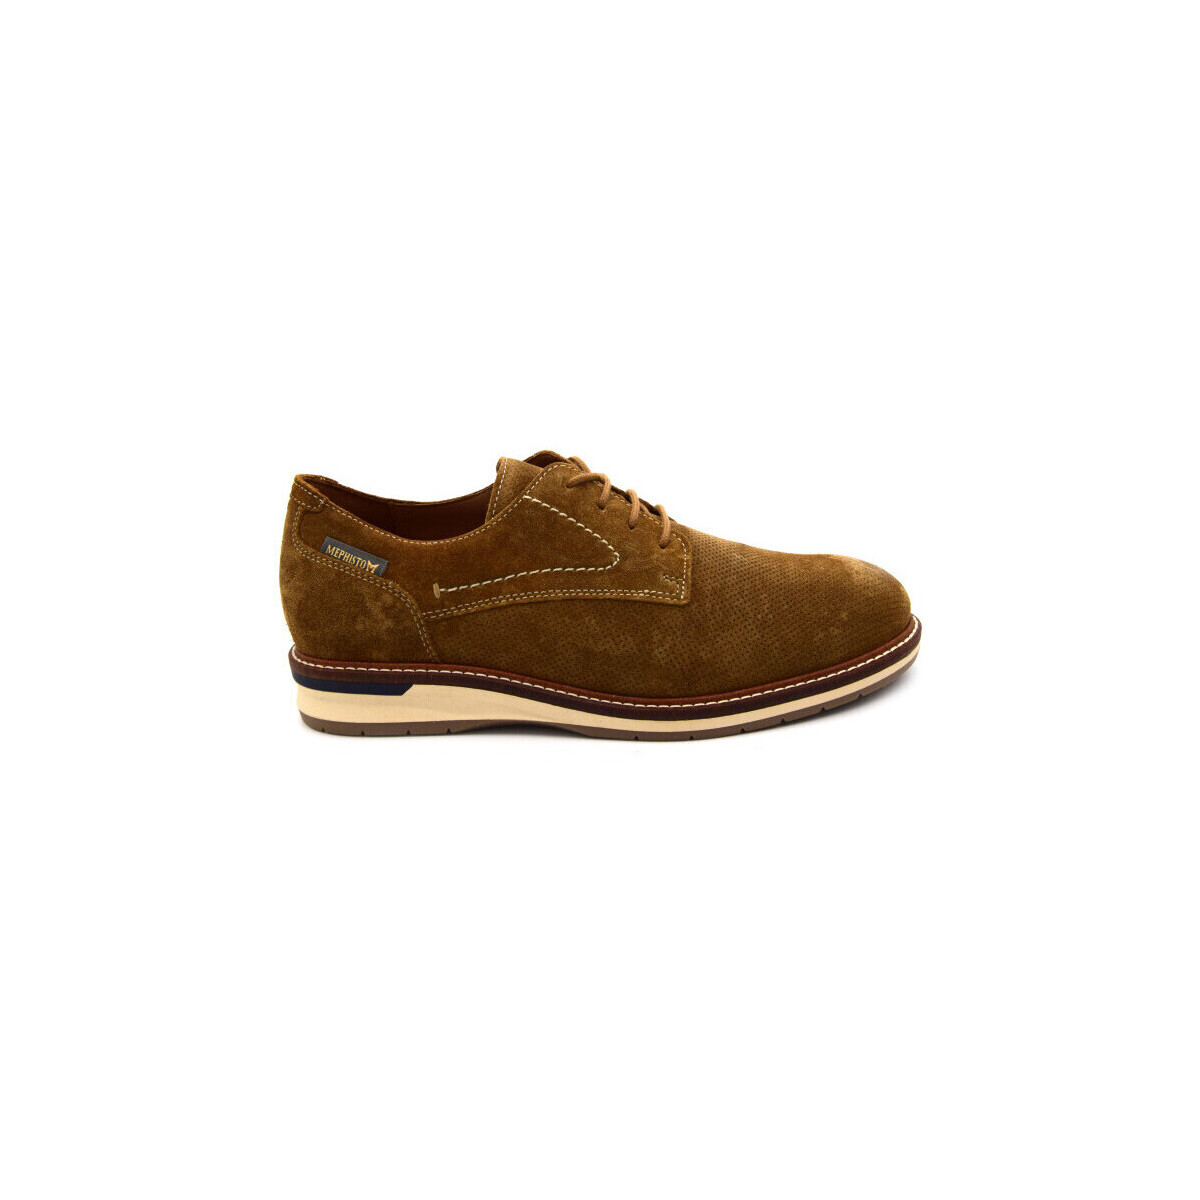 Chaussures Homme Derbies Mephisto falco perf Marron